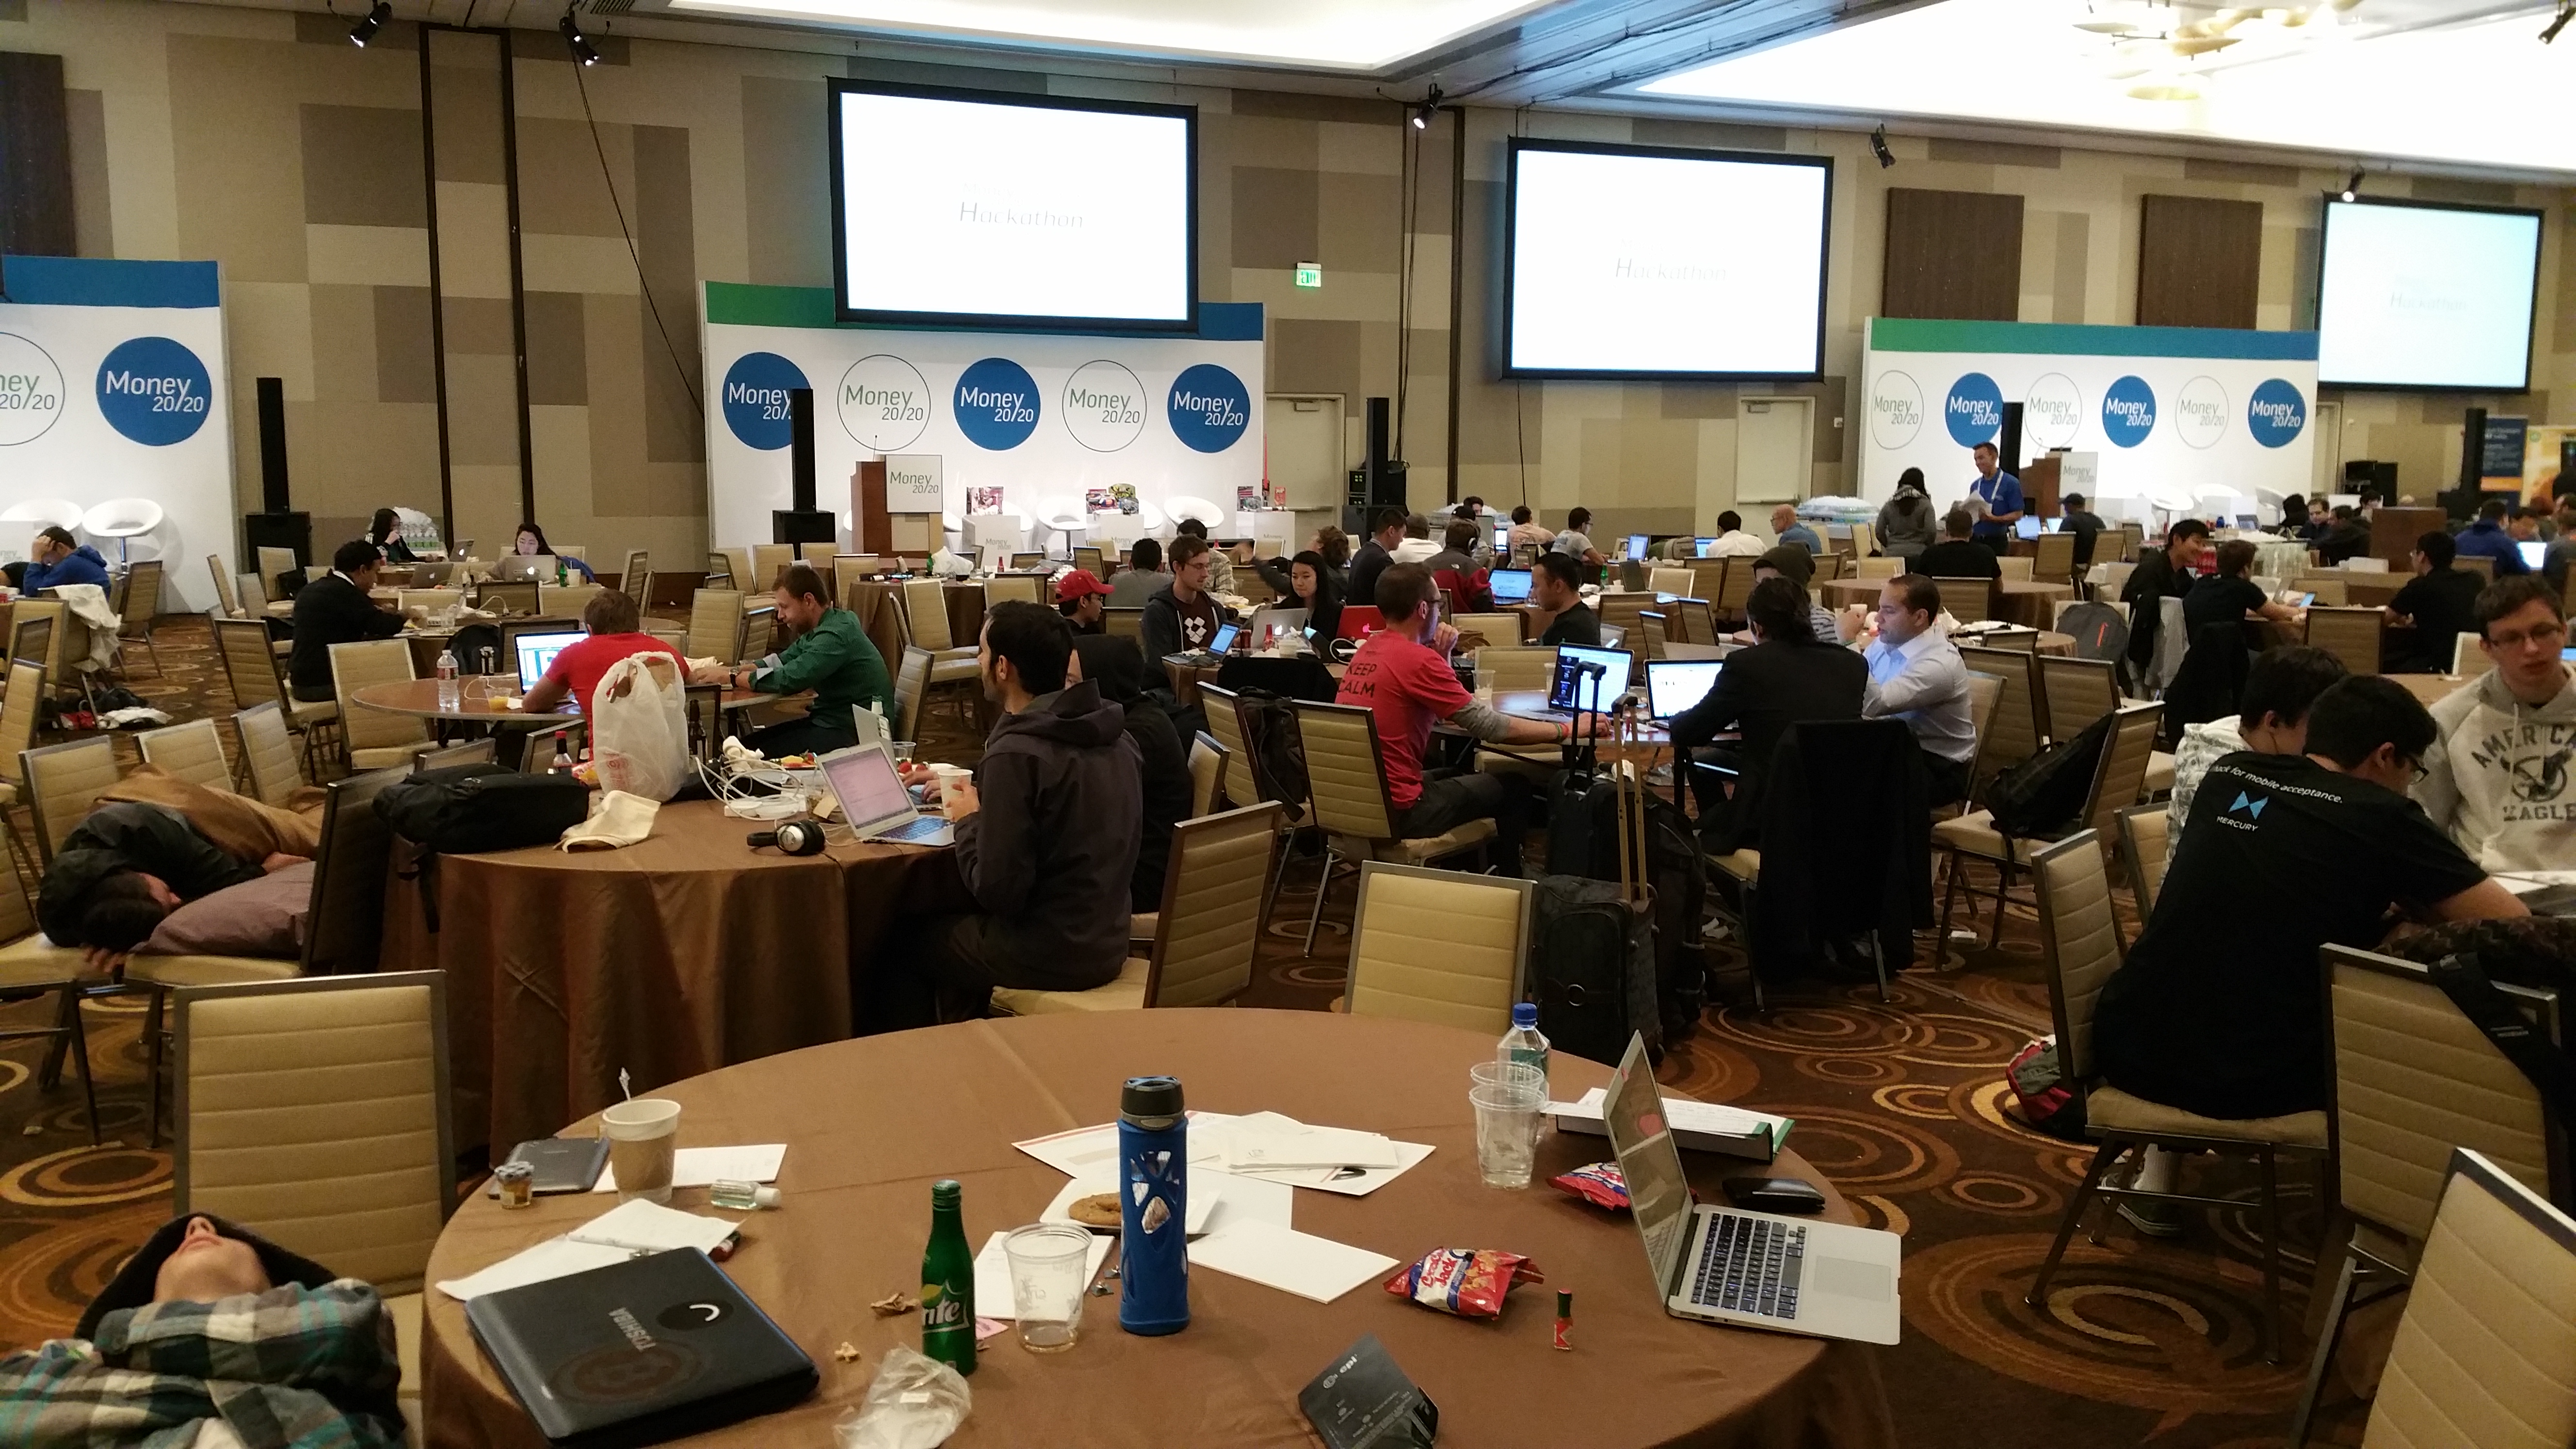 Money 2020 Hackathon participants still hard at work with 3 hours of code left.